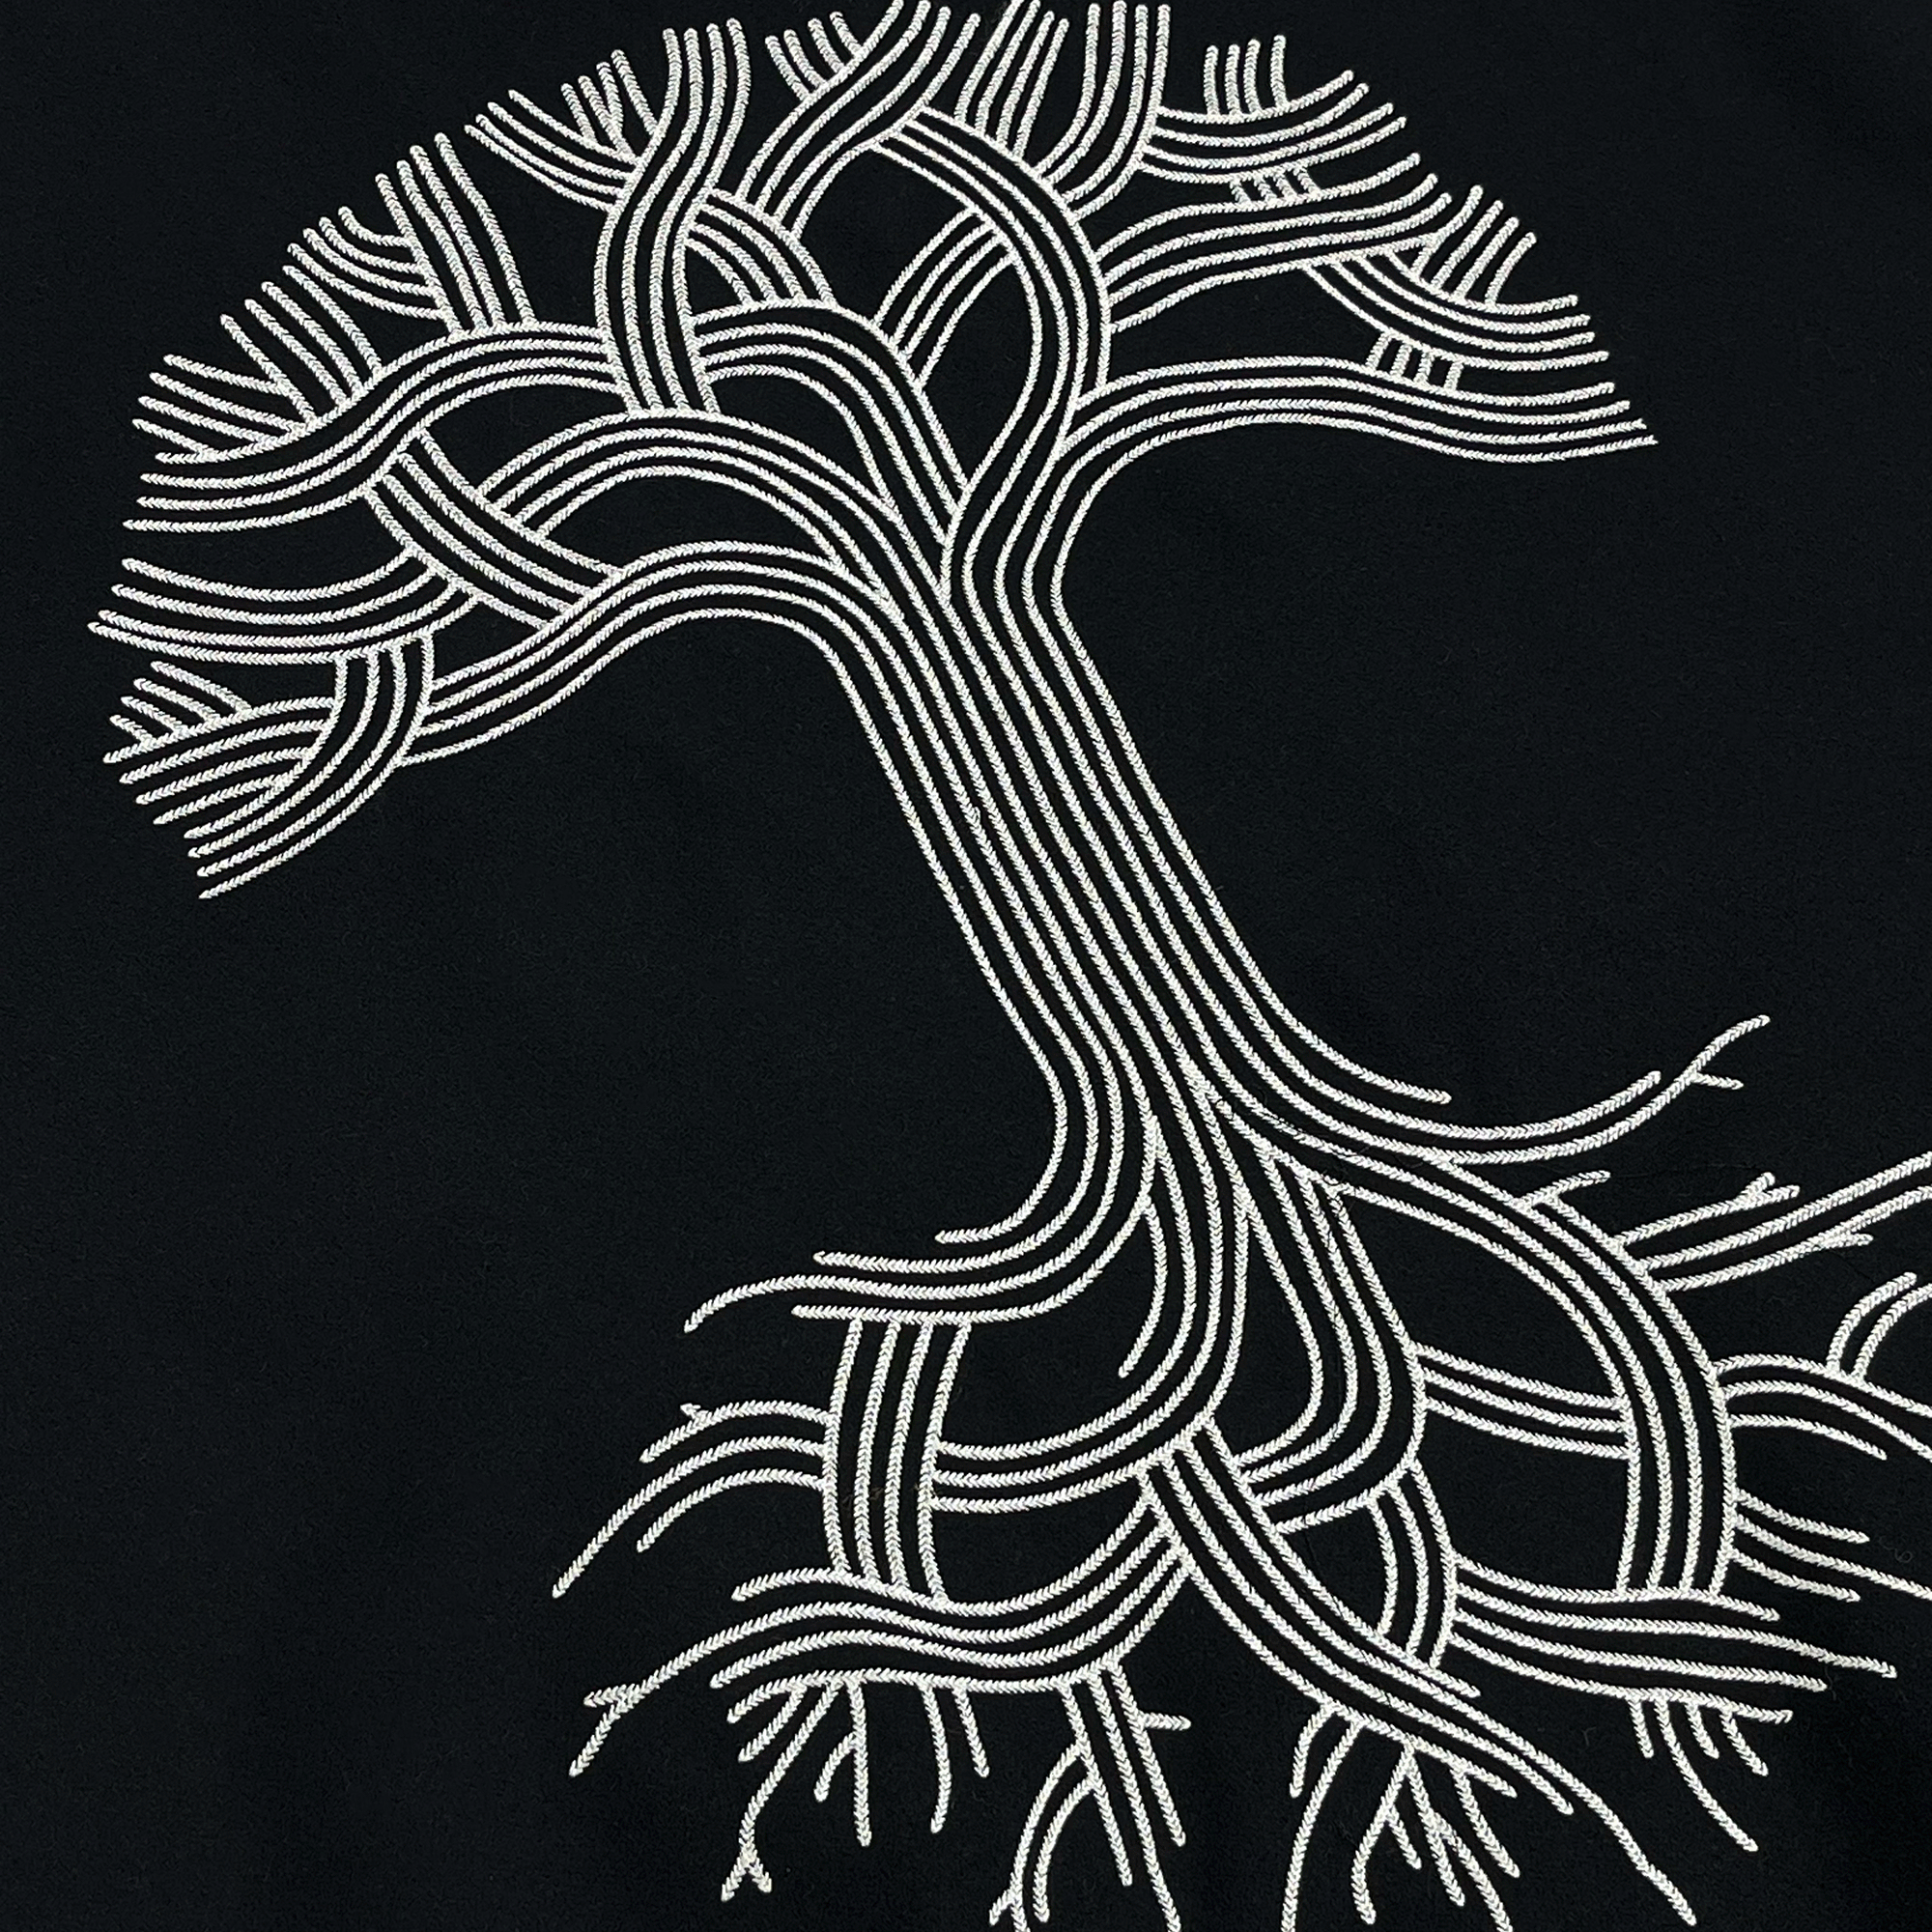  Close-up side angle view of a large Oaklandish tree logo in the center back of a black and white varsity jacket.